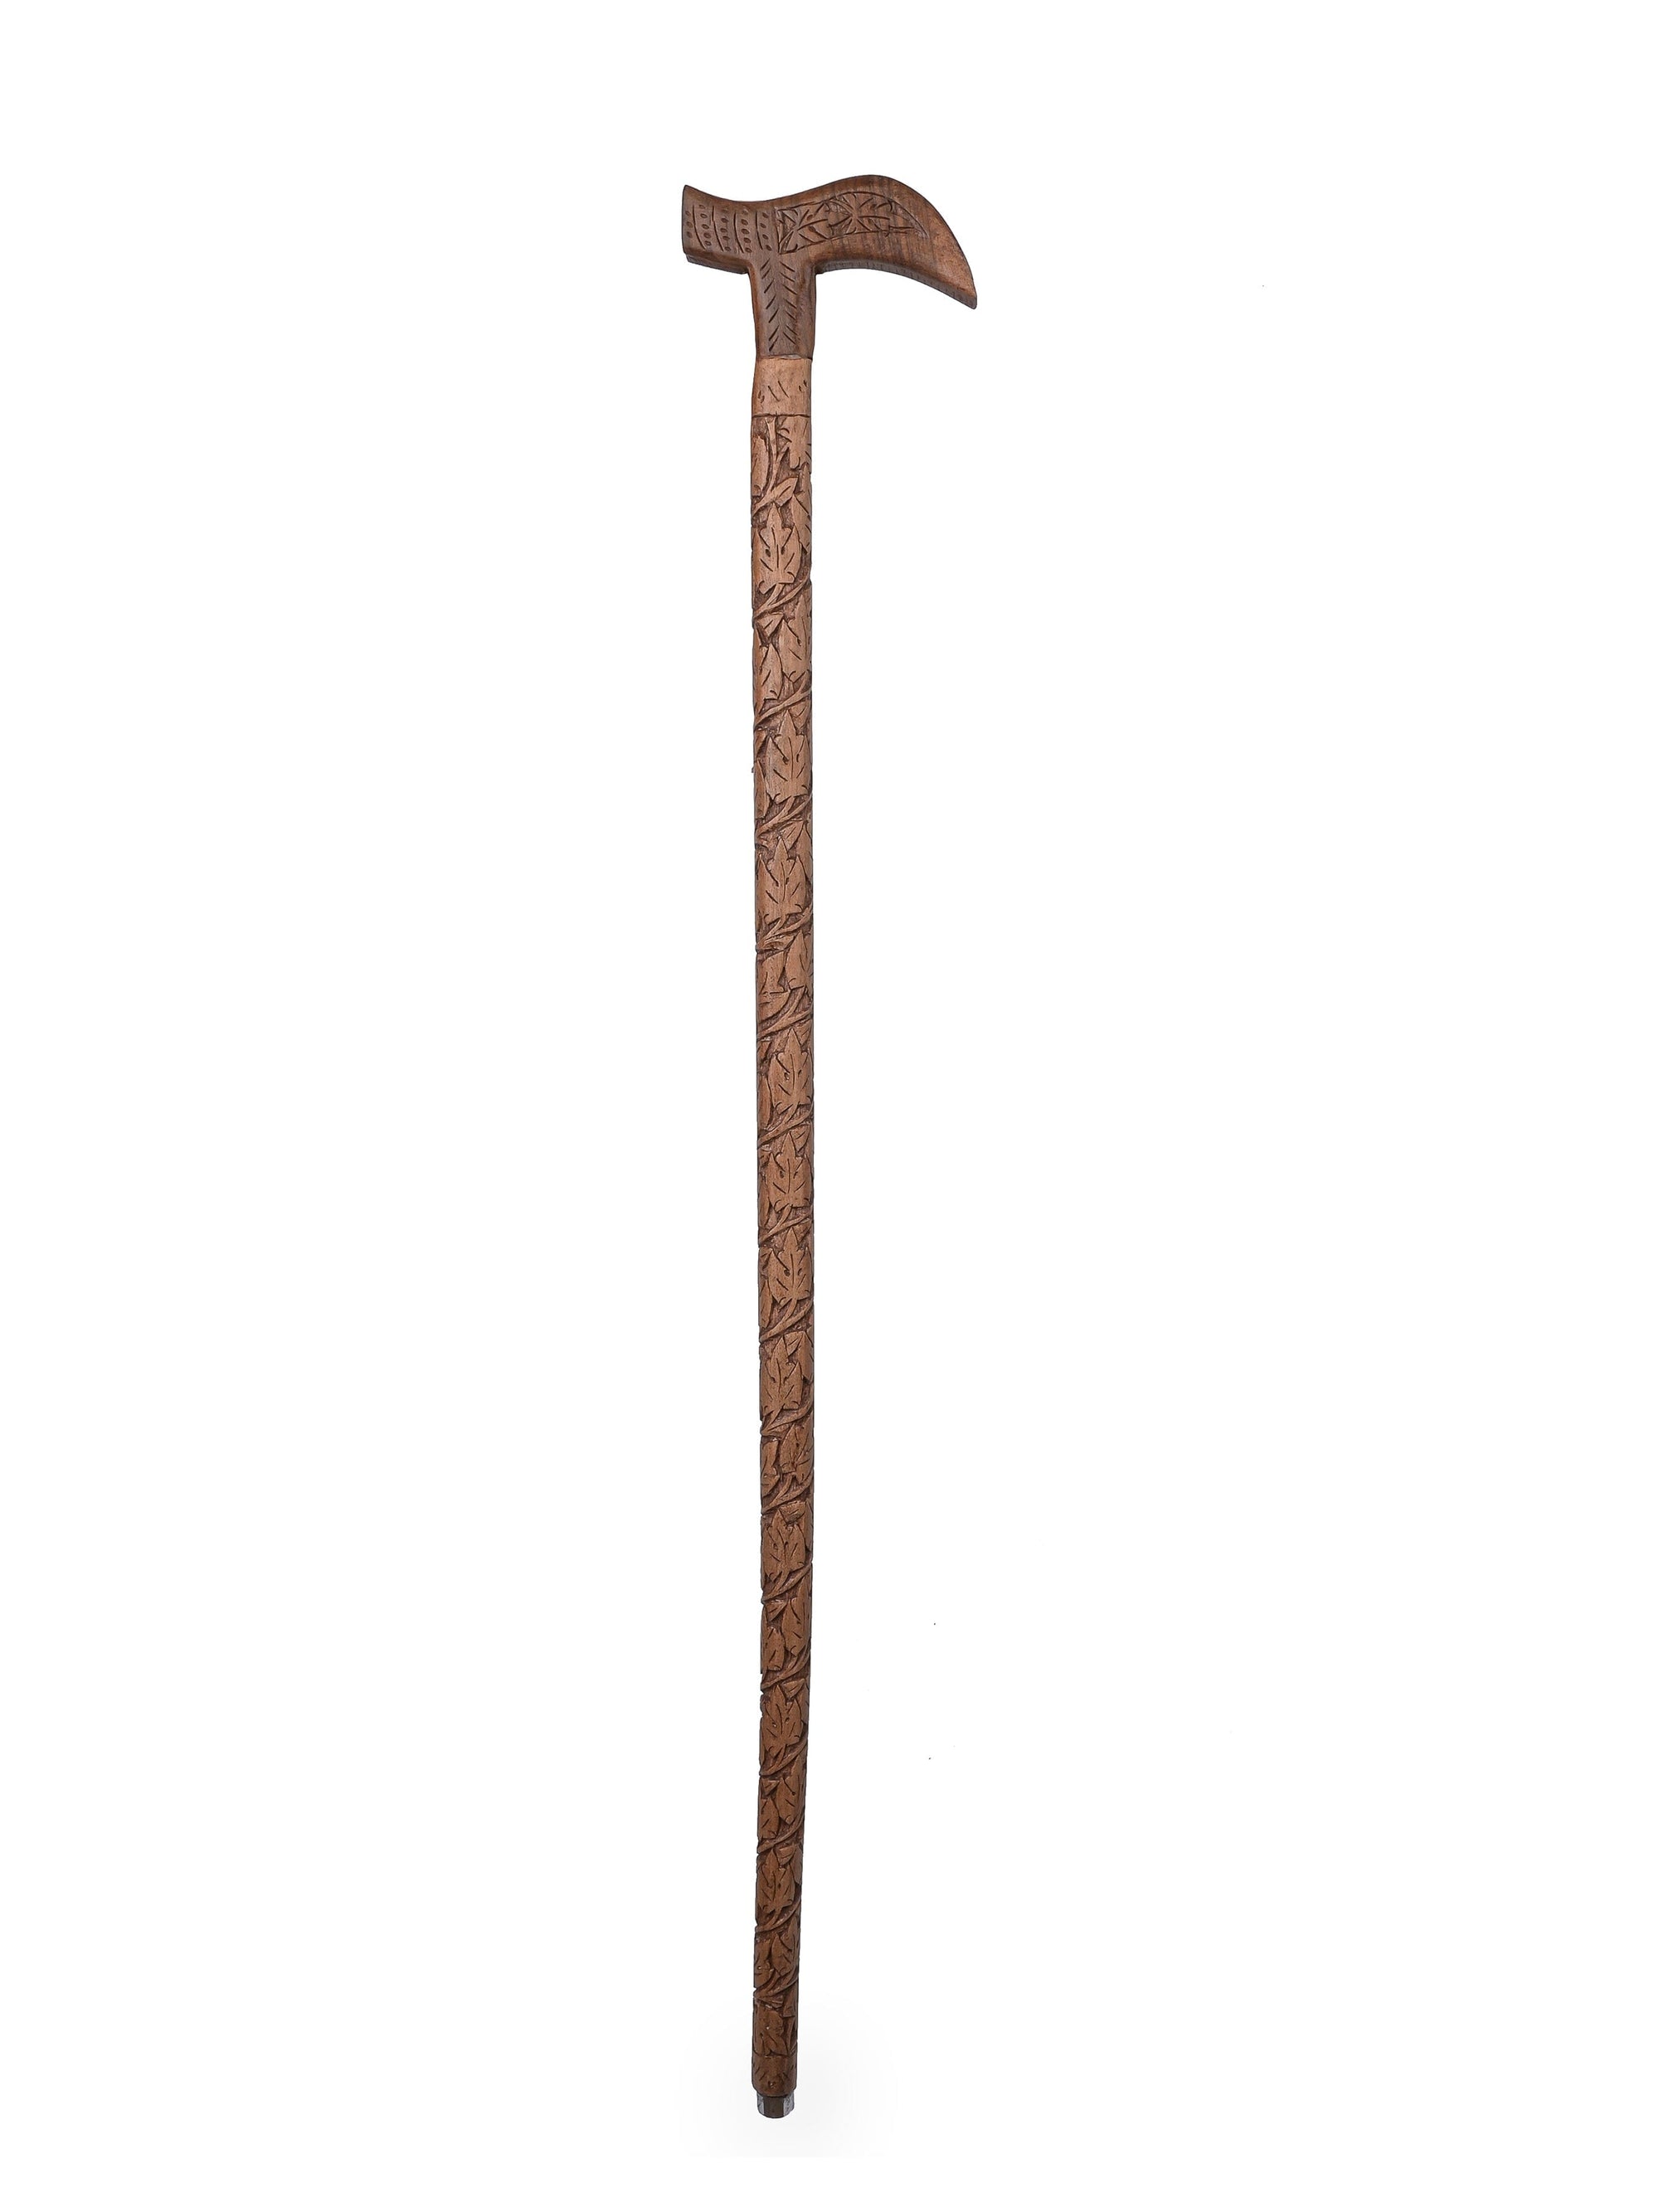 Walking Stick intricately carved out of Walnut wood - 36 inches long - The Heritage Artifacts